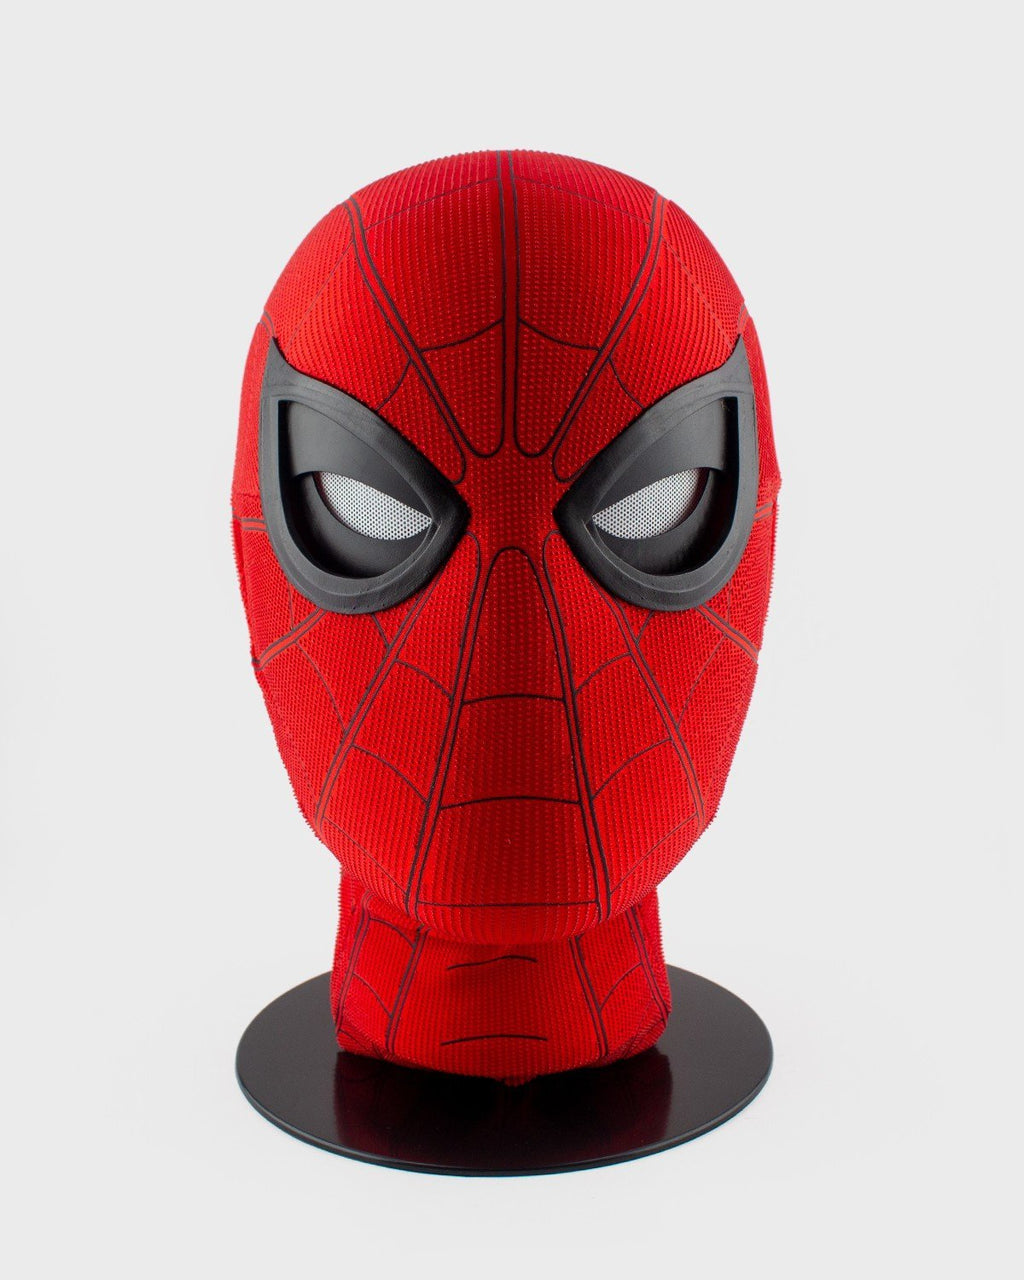 Spider Man Mask With Mechanical Lenses. -